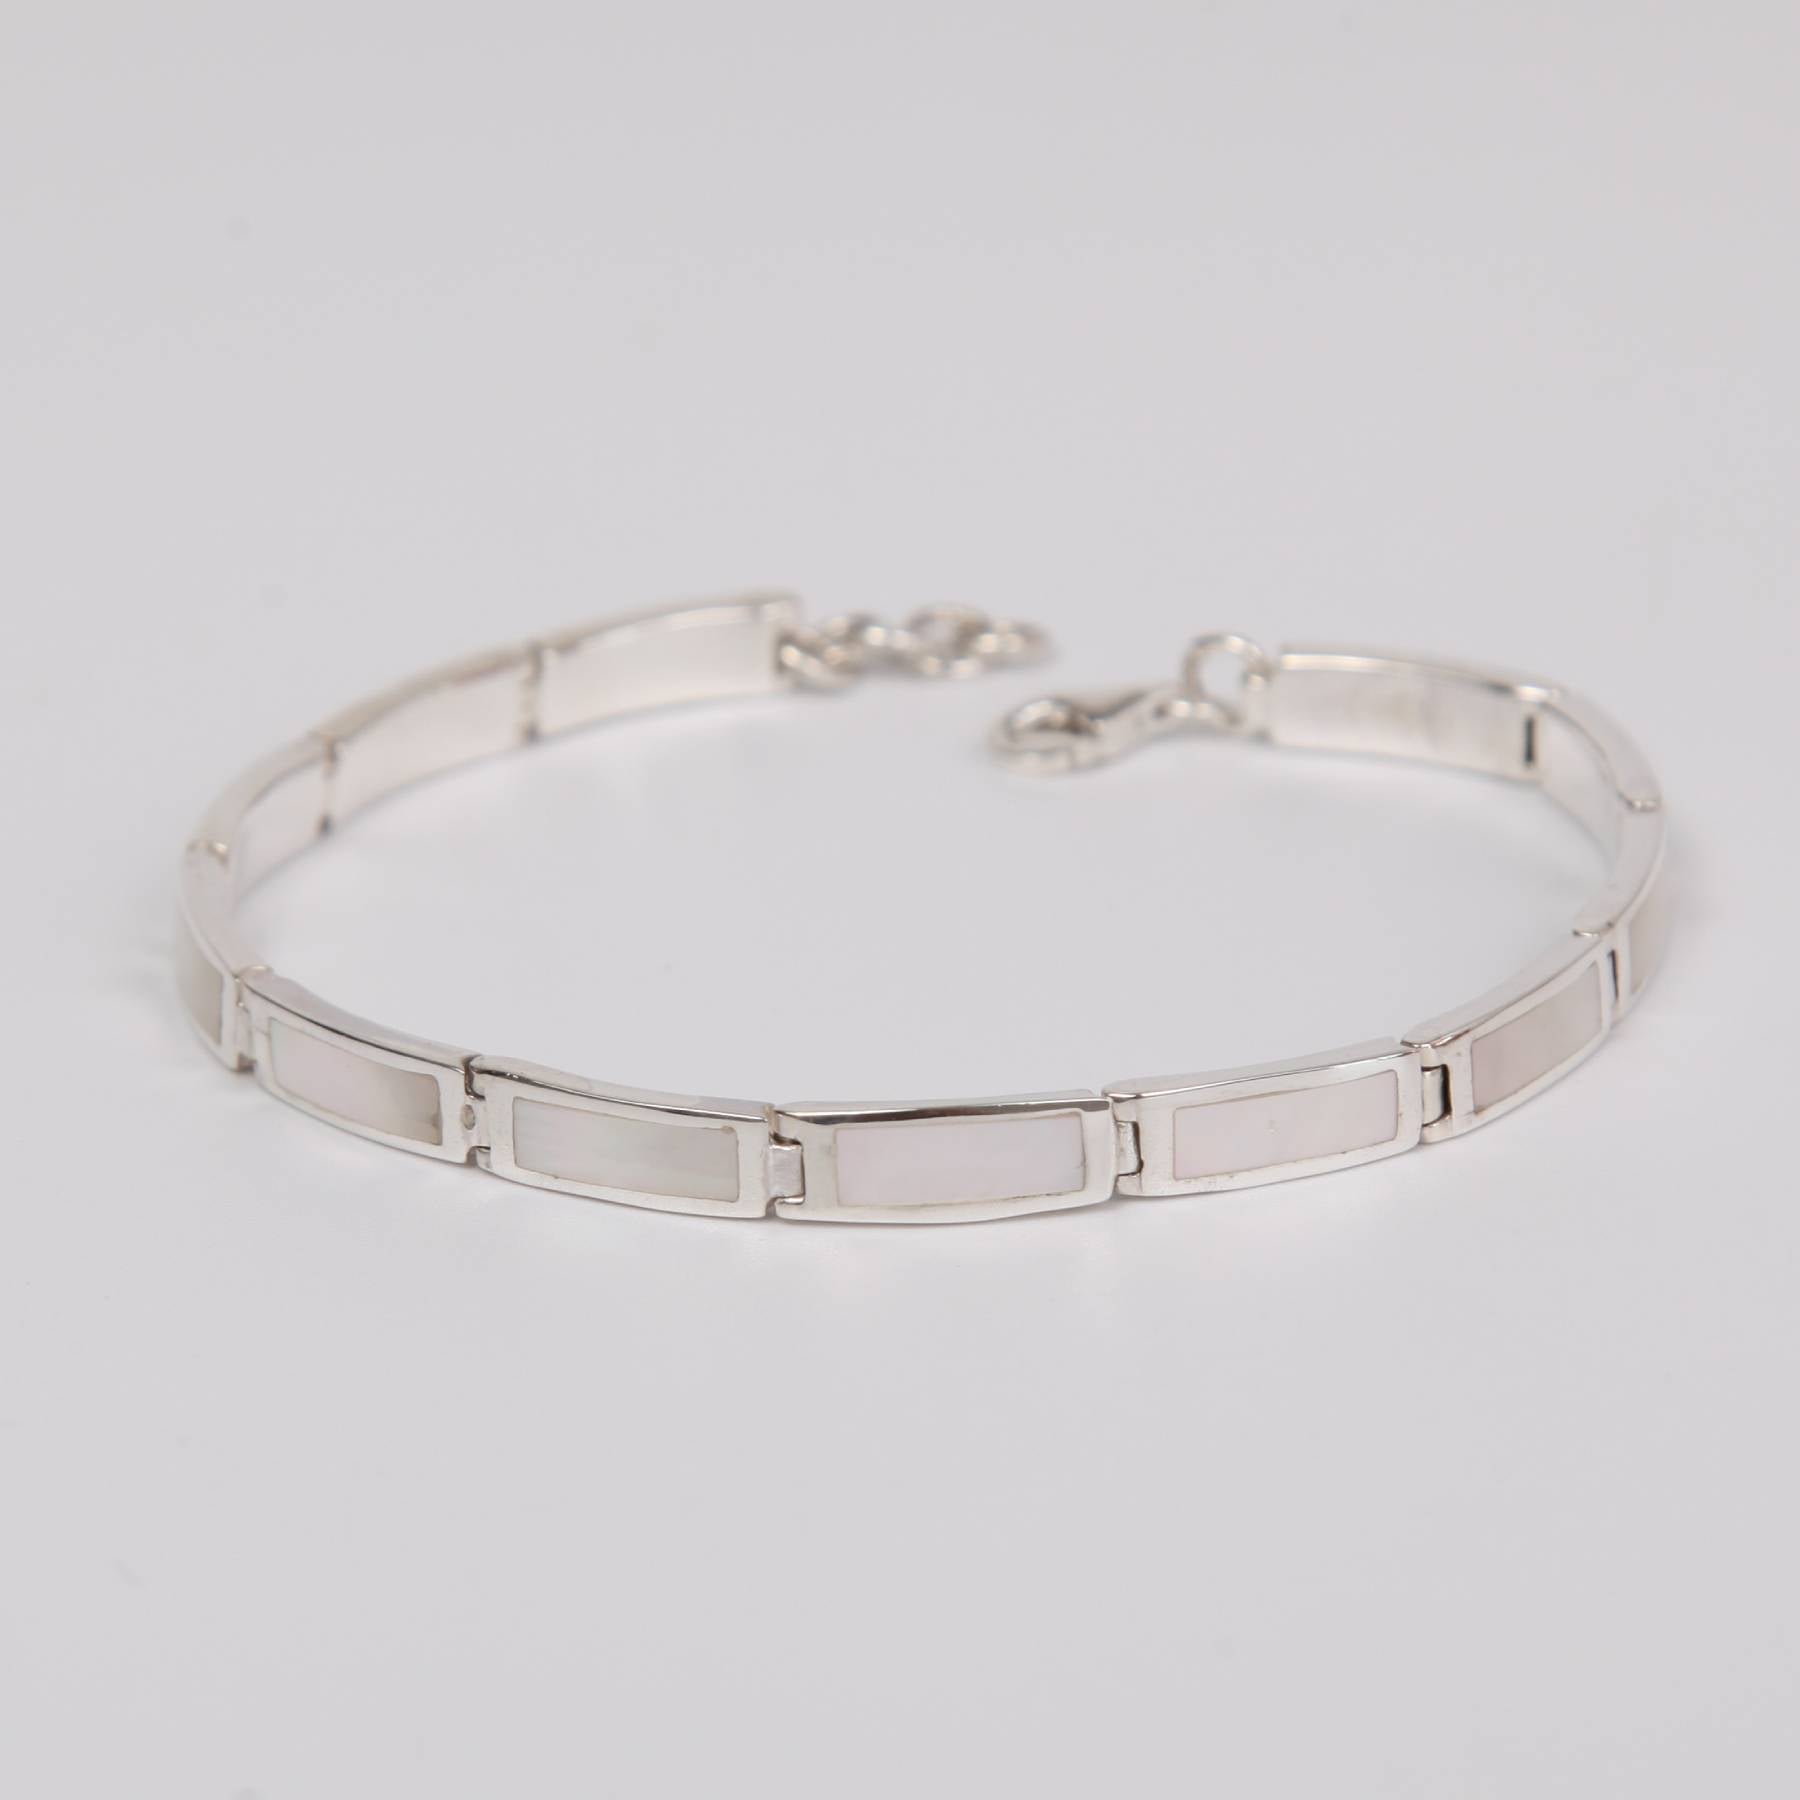 Mother of Pearl Bracelet with Sterling Silver Thin